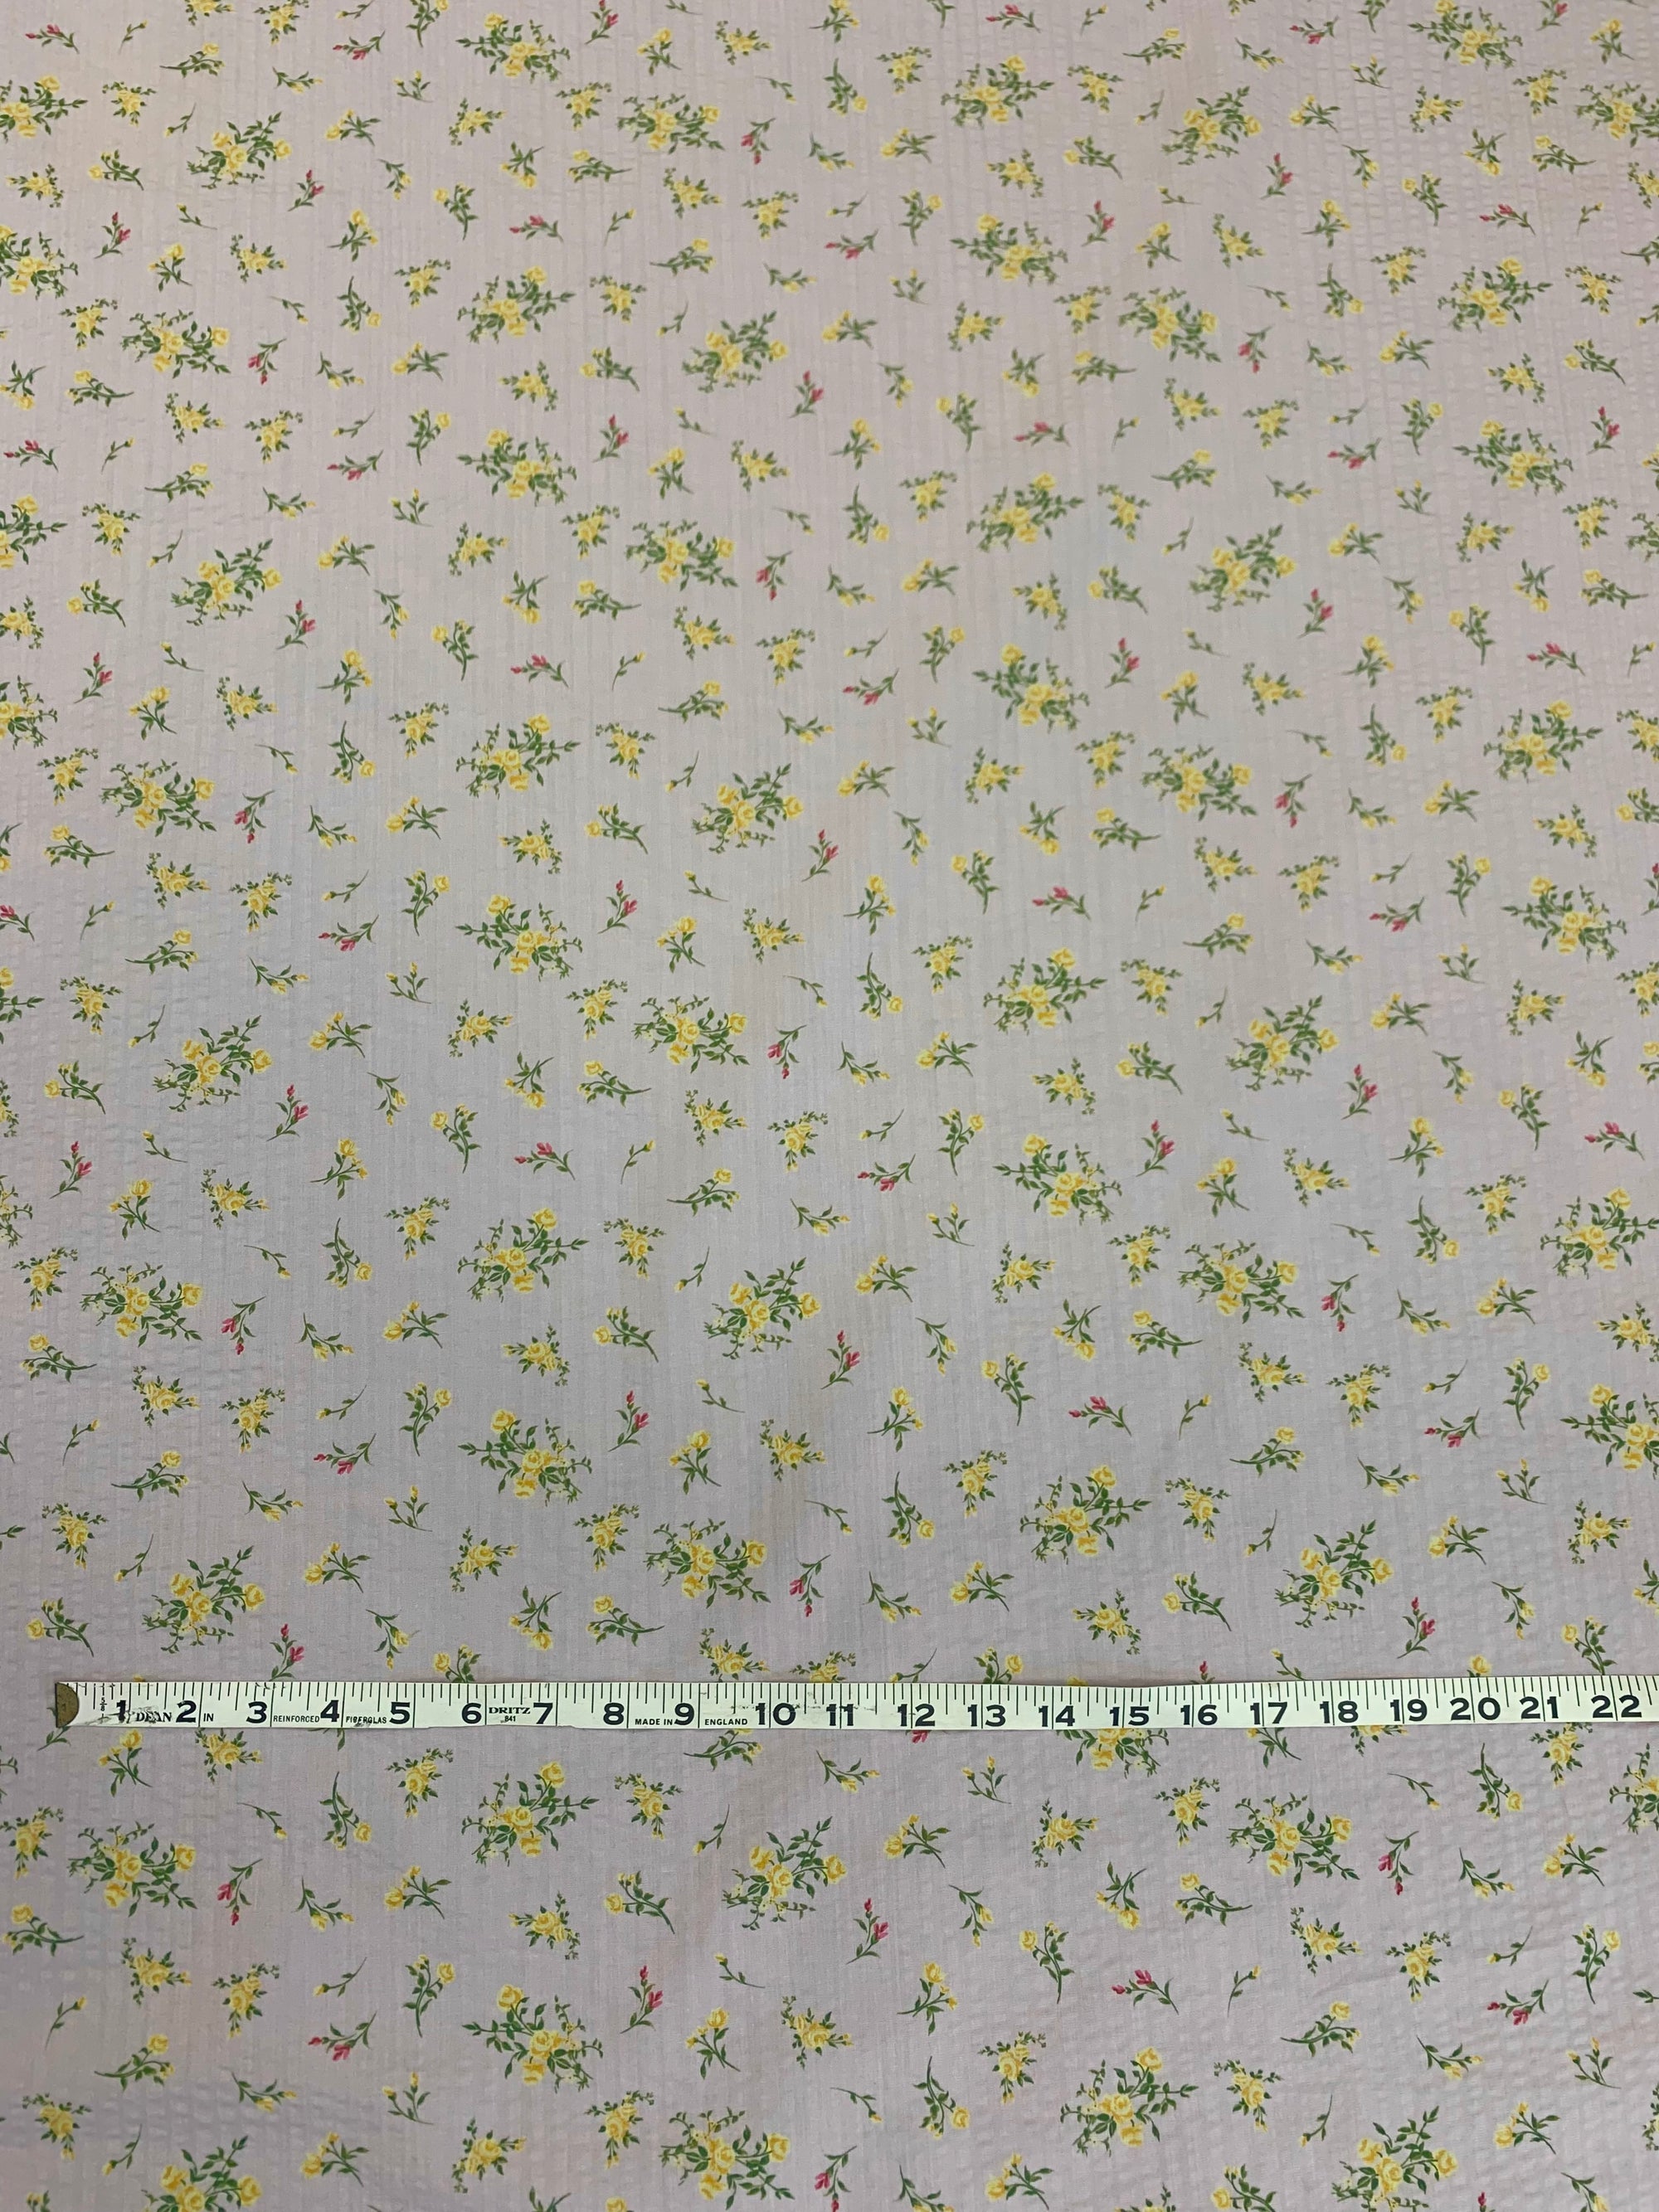  pale pink lightweight flat cotton seersucker with a ditsy yellow floral print fabric with a white measuring tape on top